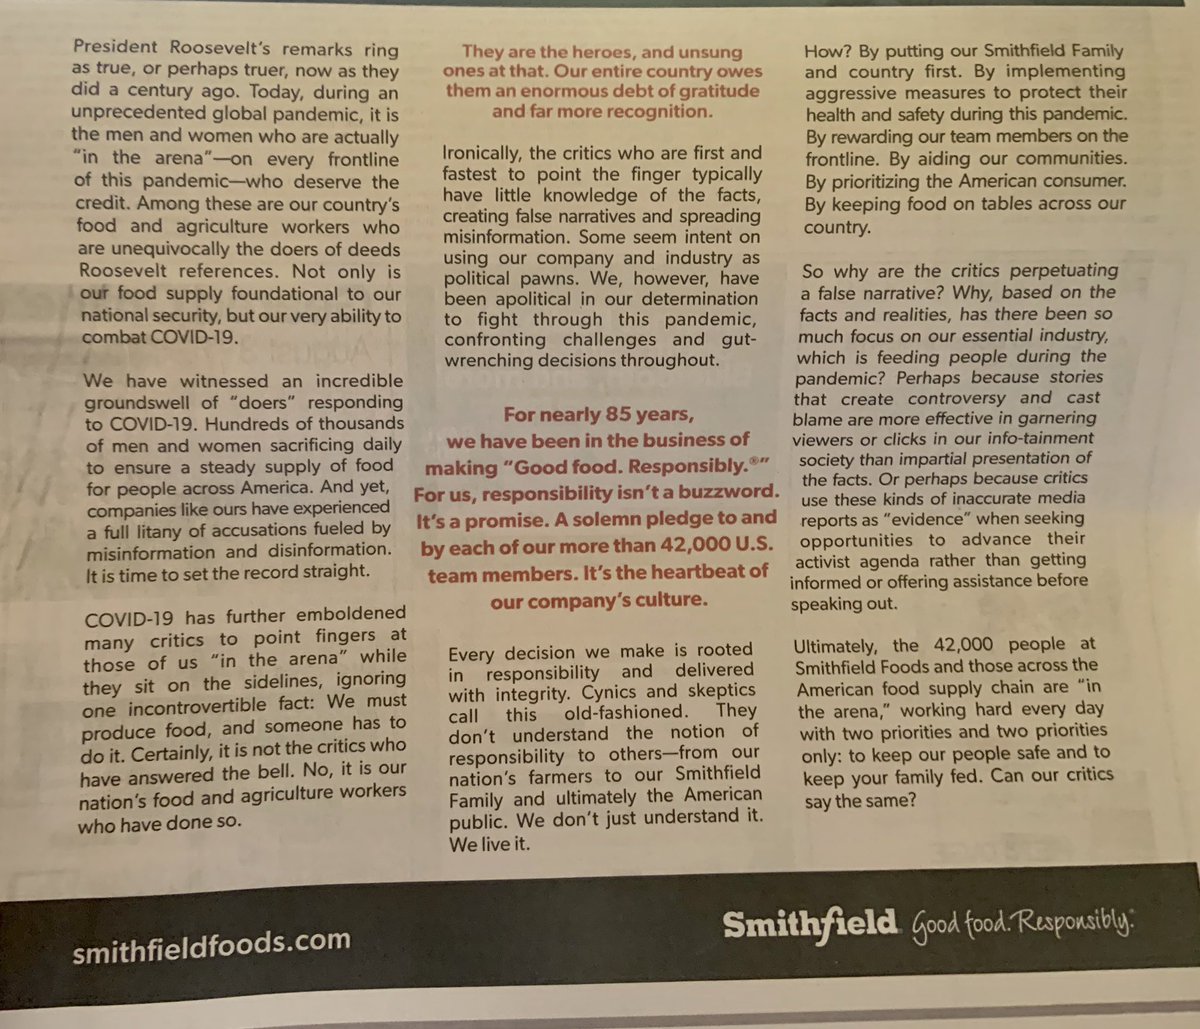 I just opened my Sunday NYT to see a full page ad from  @SmithfieldFoods accusing its “critics” (e.g. the press, at least in part) of spreading “false narratives,” “misinformation,” and “disinformation” about its Covid-19 response. I have, unsurprisingly, some thoughts on that.